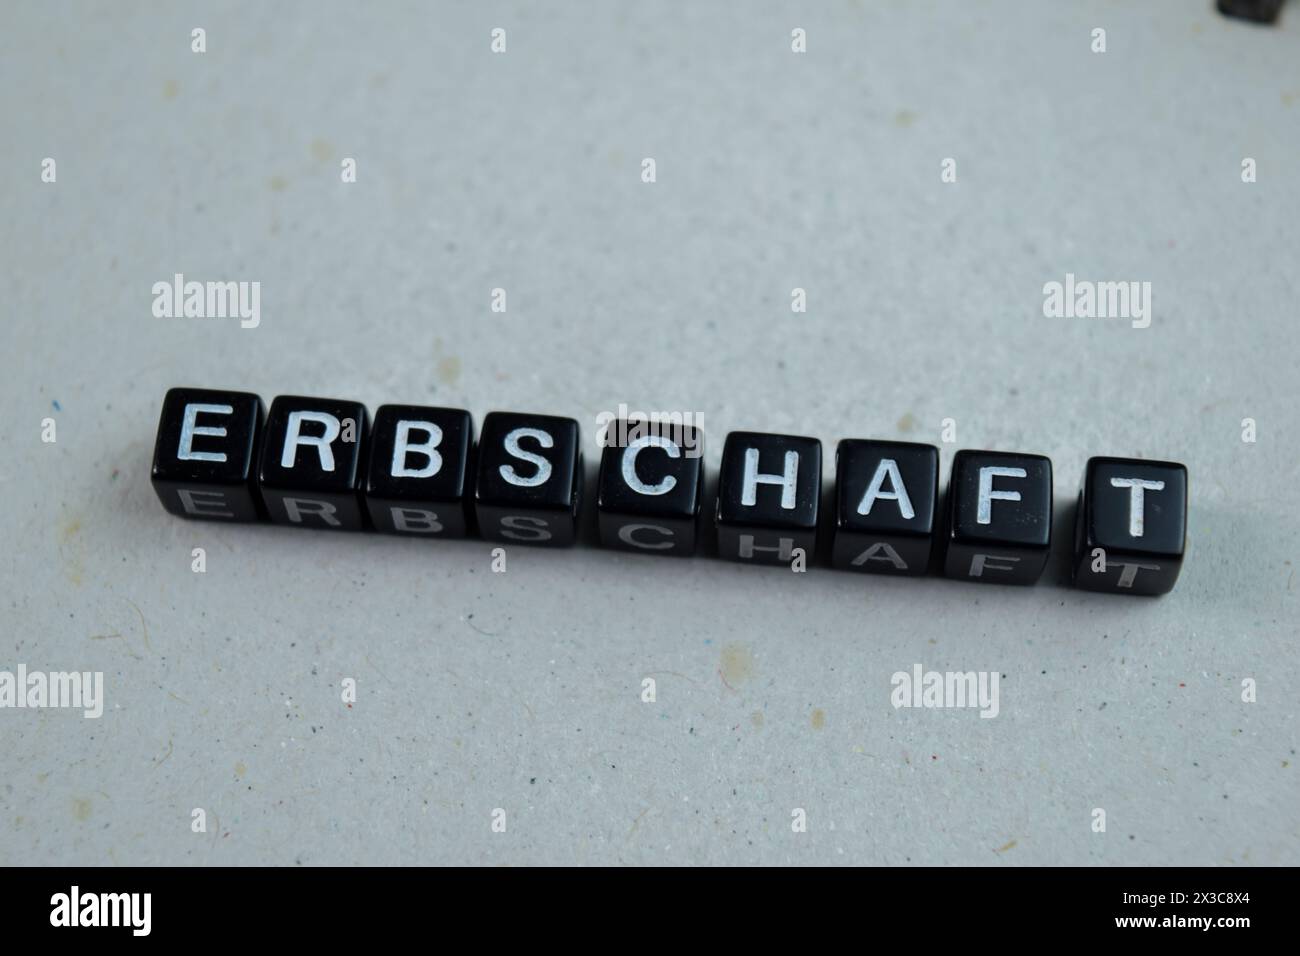 Concept of Erbschaft written on wooden blocks. Cross processed image on Wooden Background Stock Photo